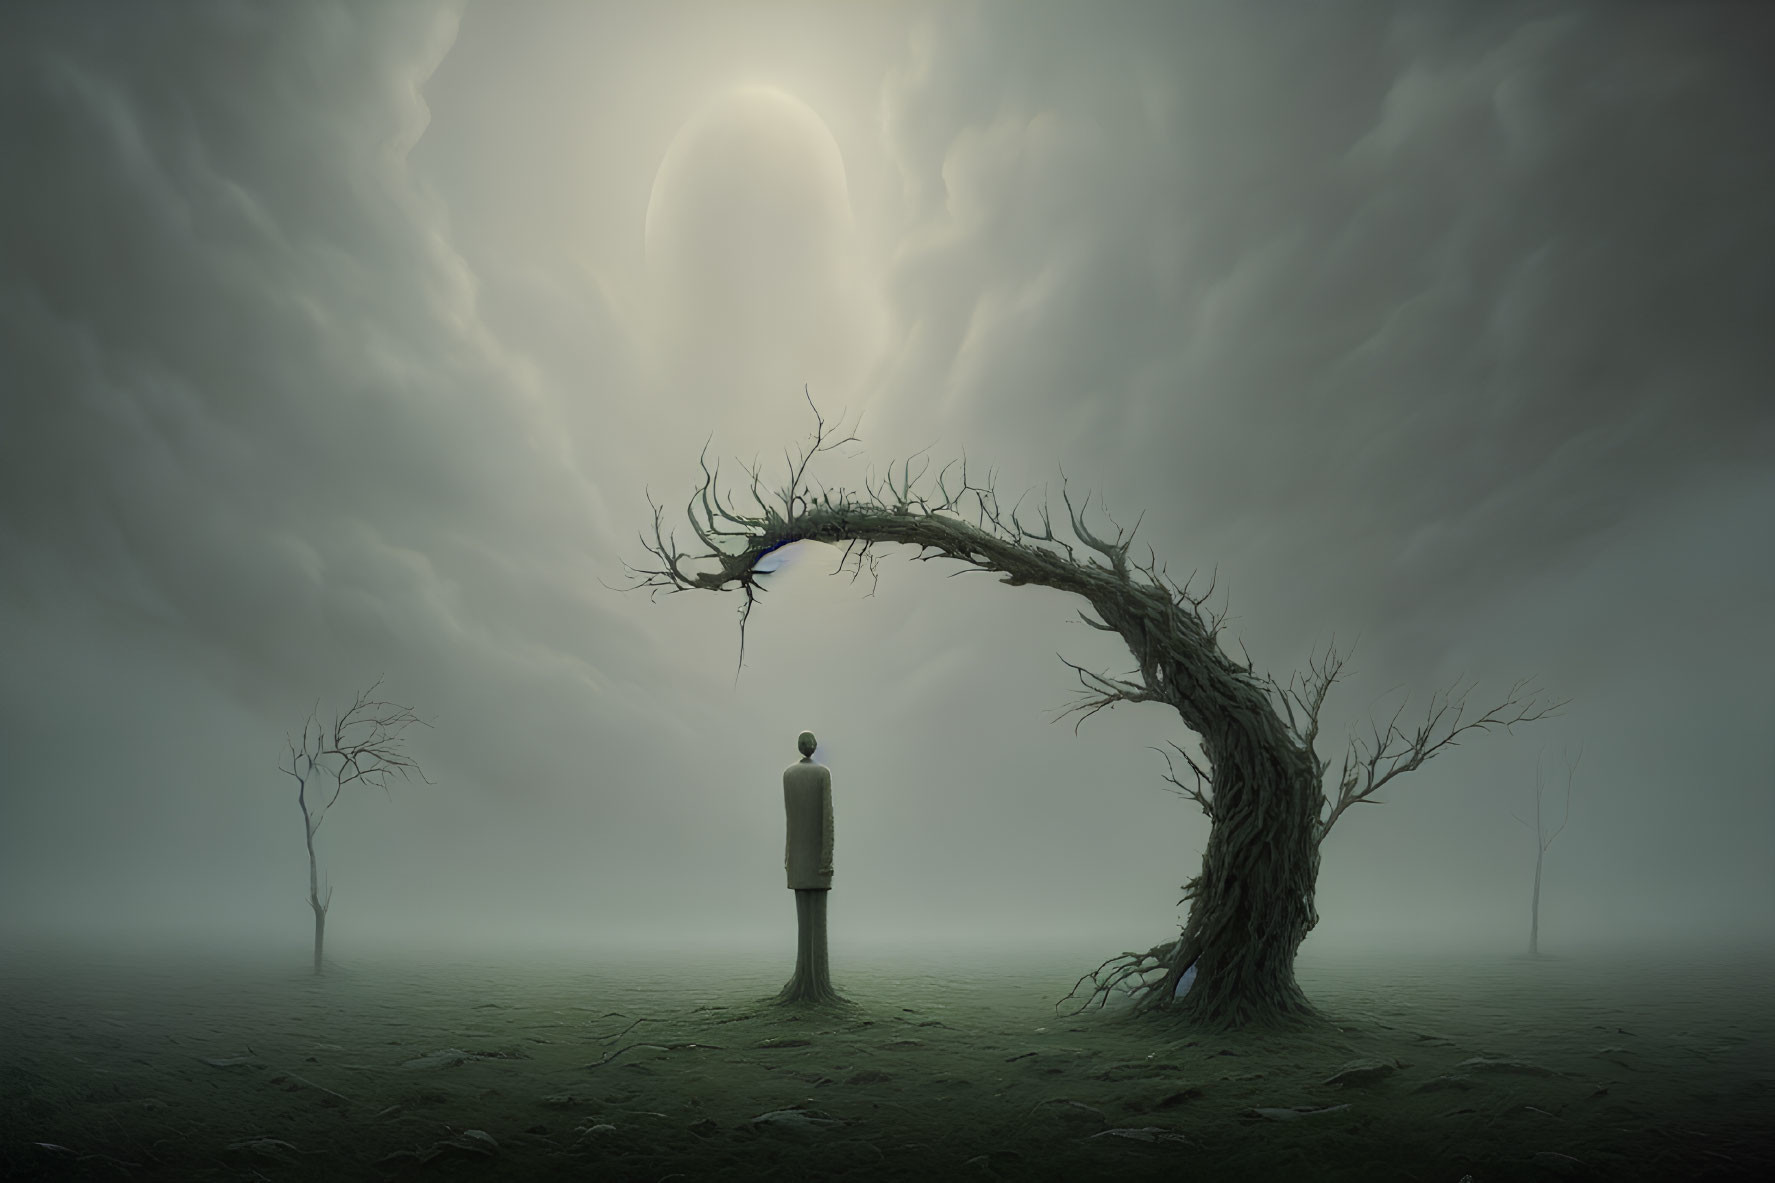 Person standing under bent, leafless tree in misty landscape with subdued sun.